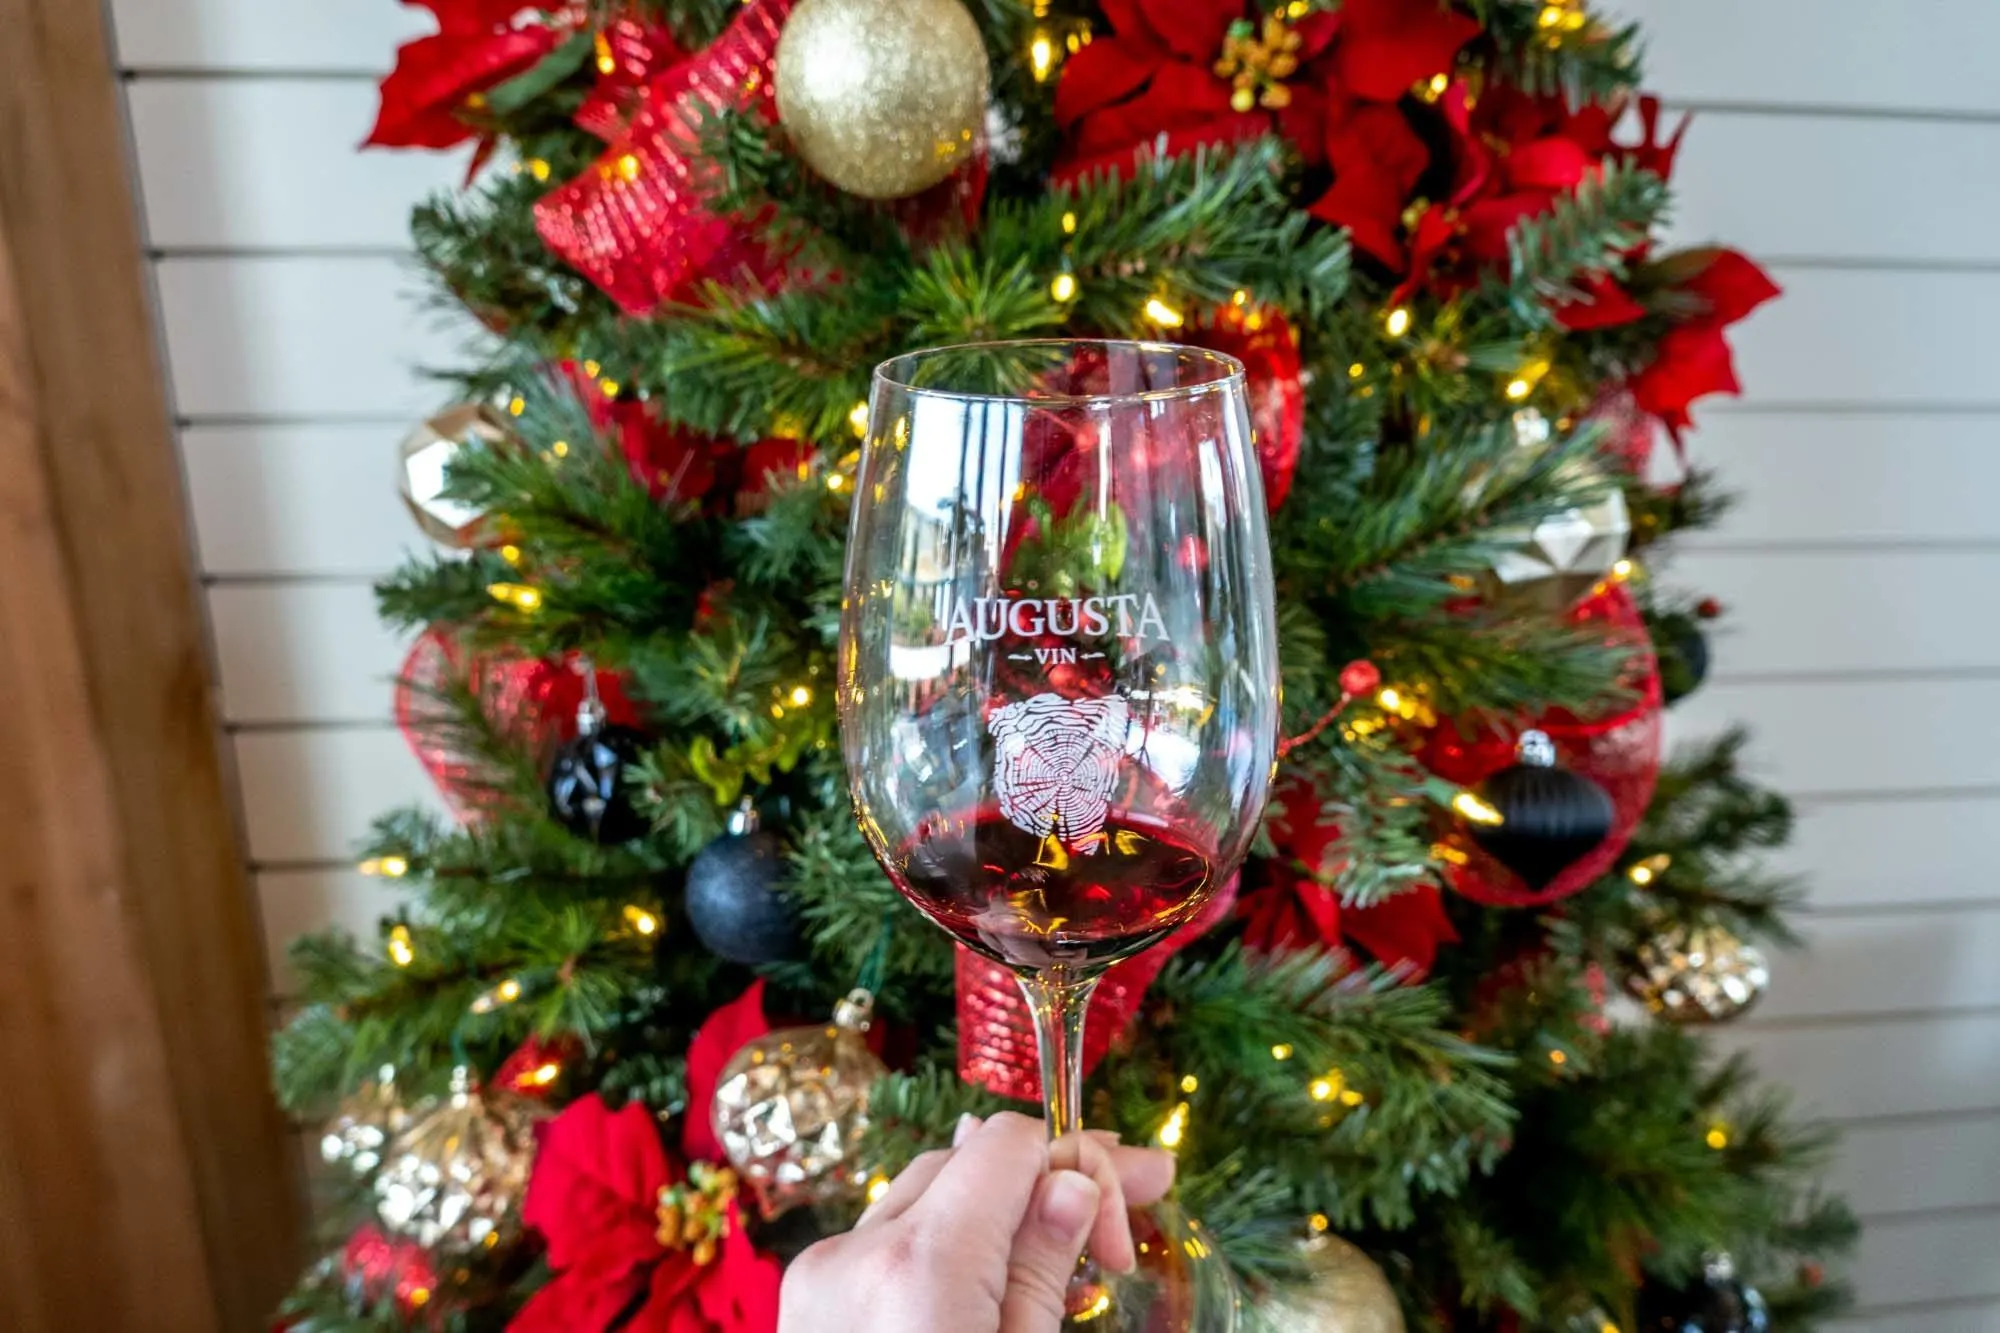 A wine glass labeled "Augusta Vin" in front of a Christmas wreath